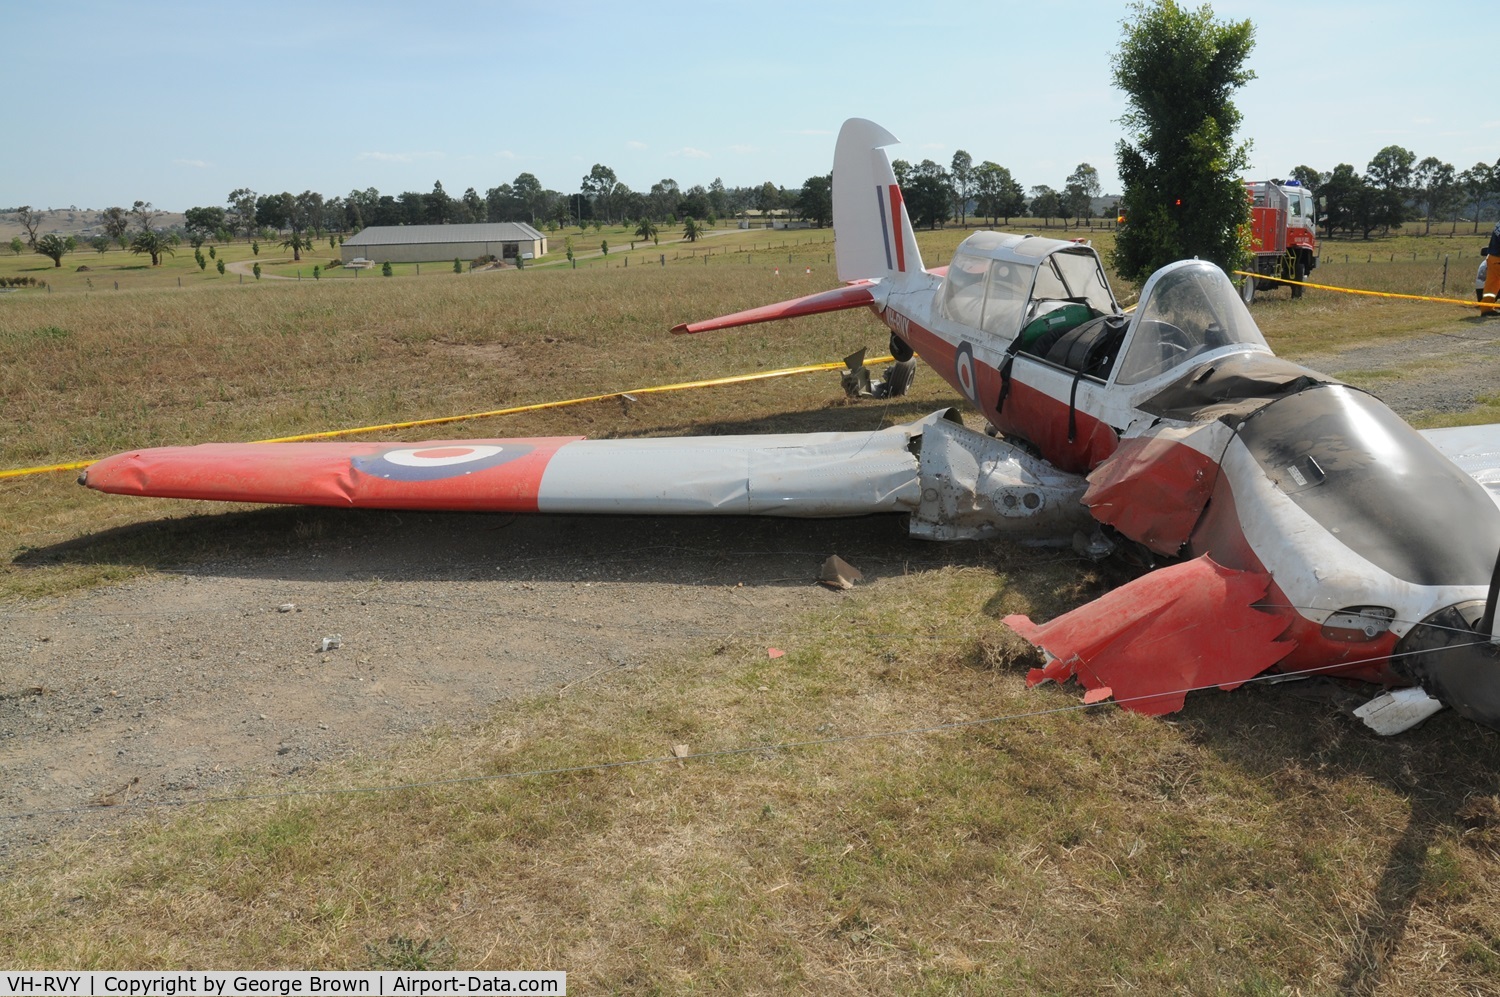 VH-RVY, 1951 De Havilland DHC-1 Chipmunk T.10 C/N C1/0472-DHB.f336, Another view of the crashed aircraft